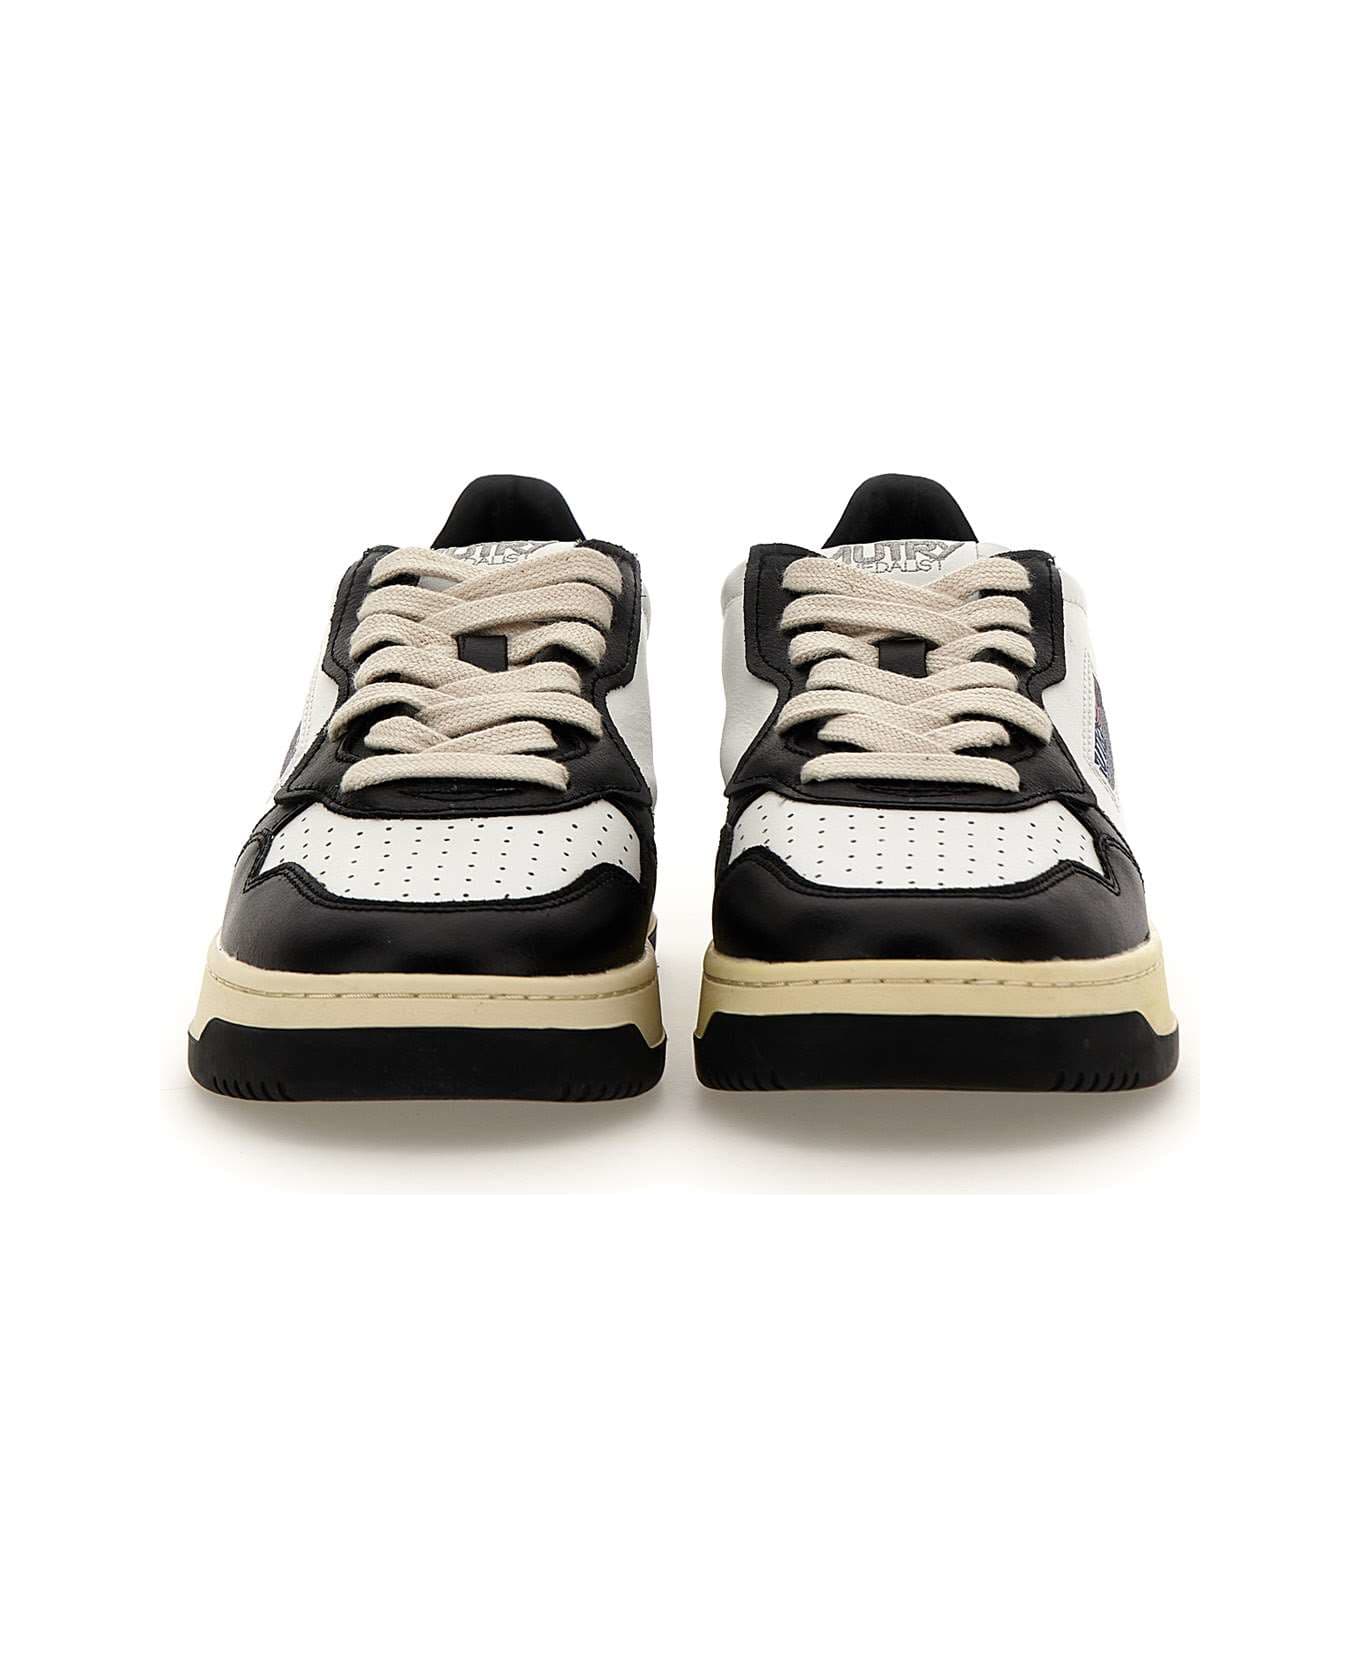 Autry "wb01" Sneakers - WHITE-BLACK